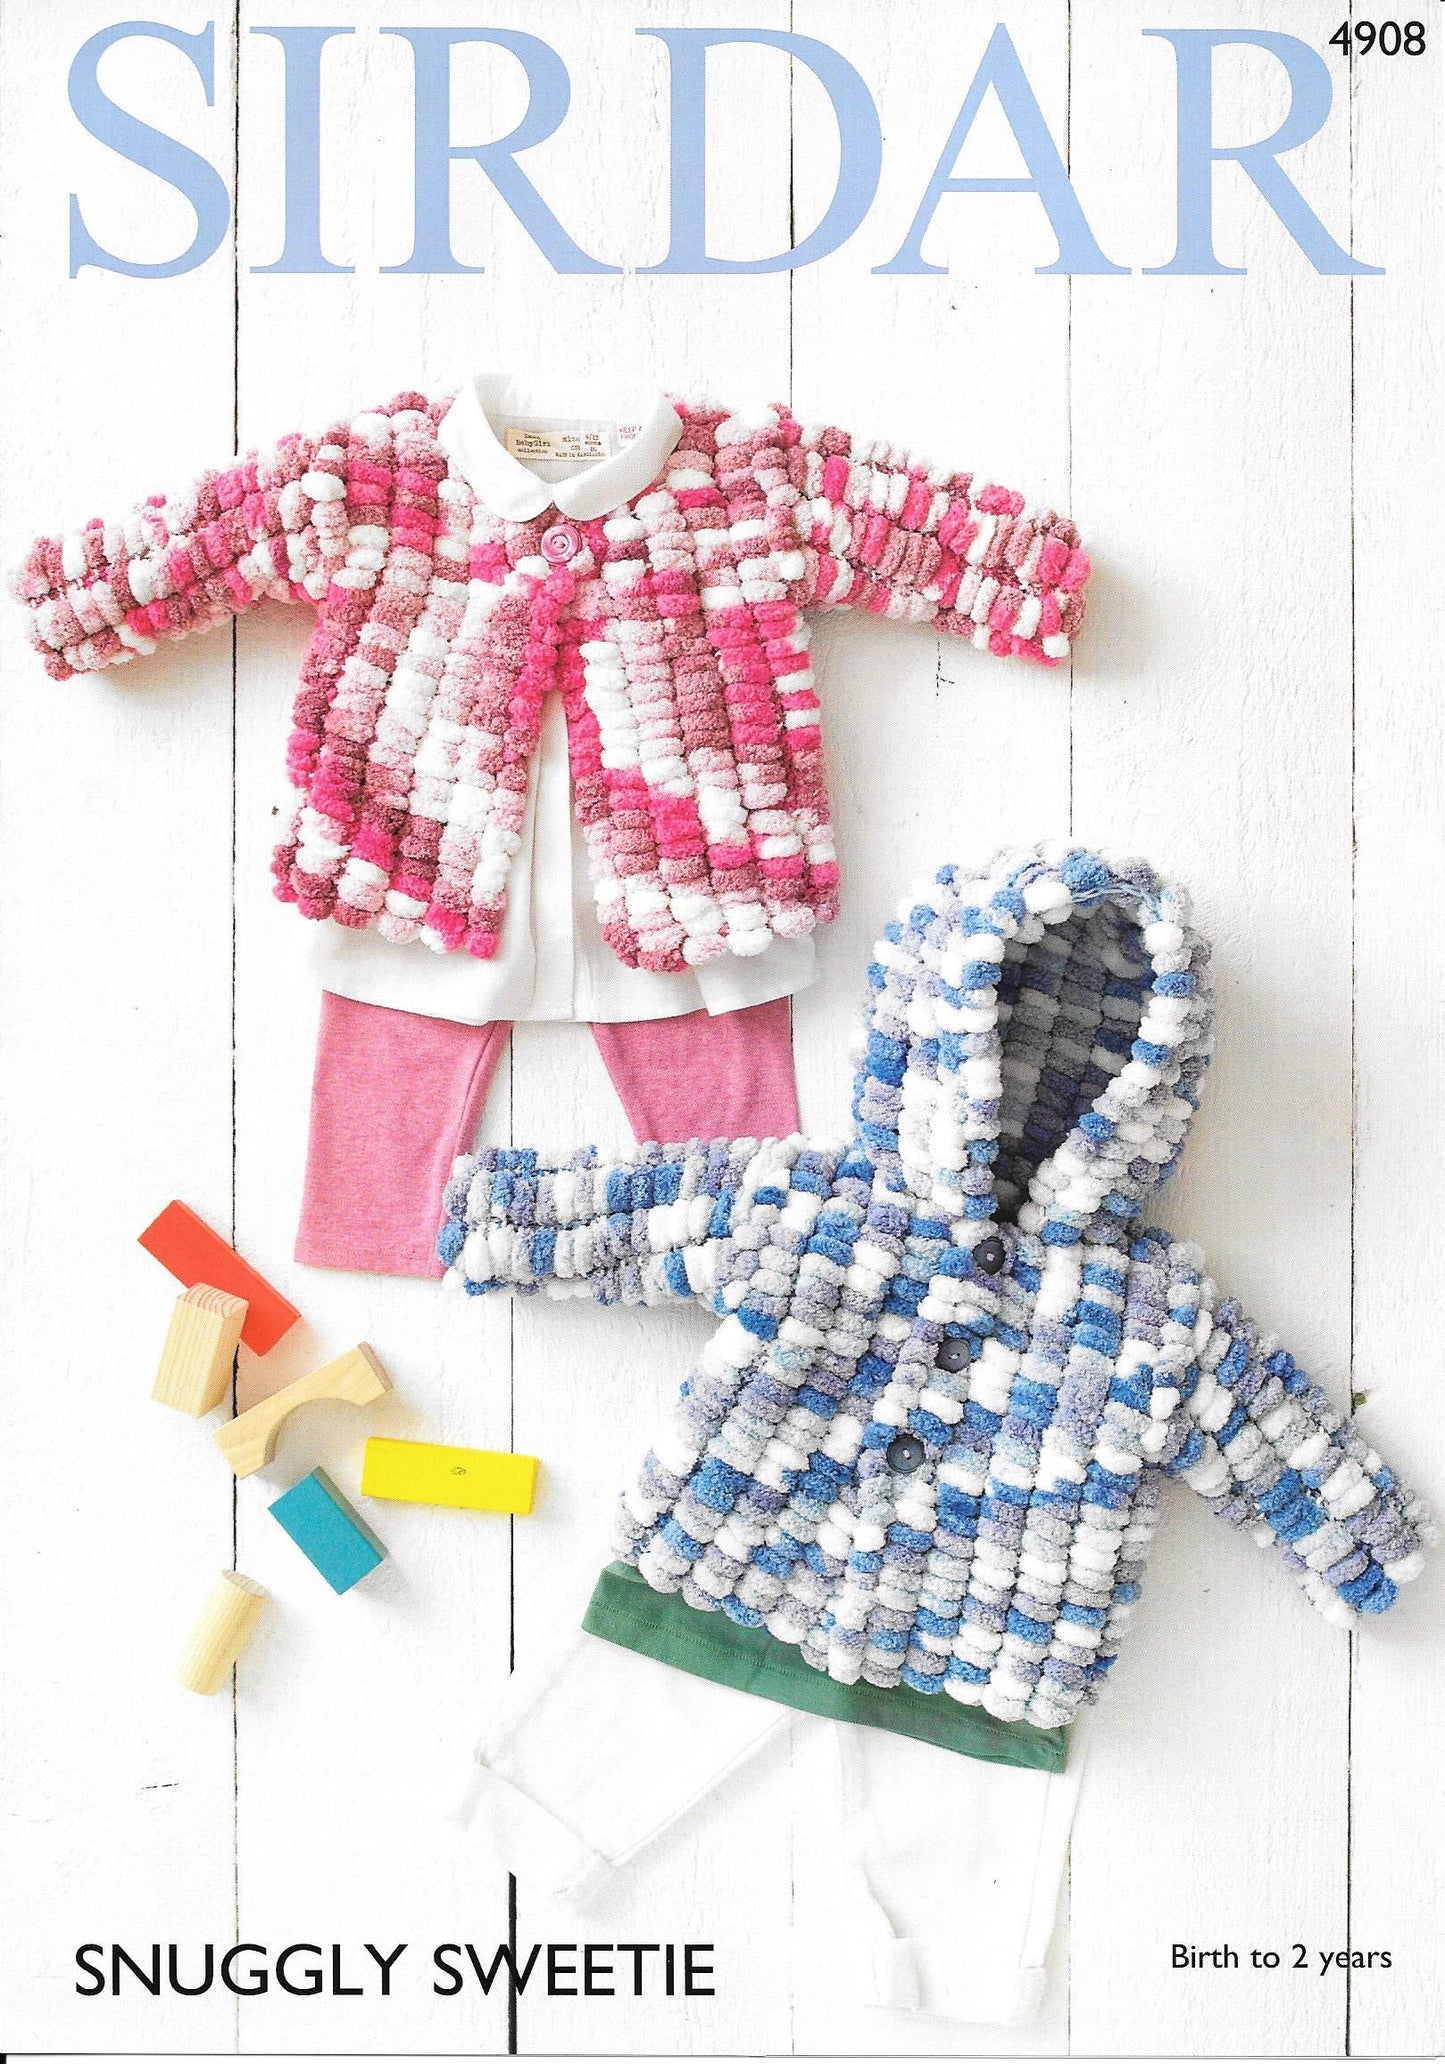 4908 Sirdar Snuggly Sweetie baby cardigans knitting pattern